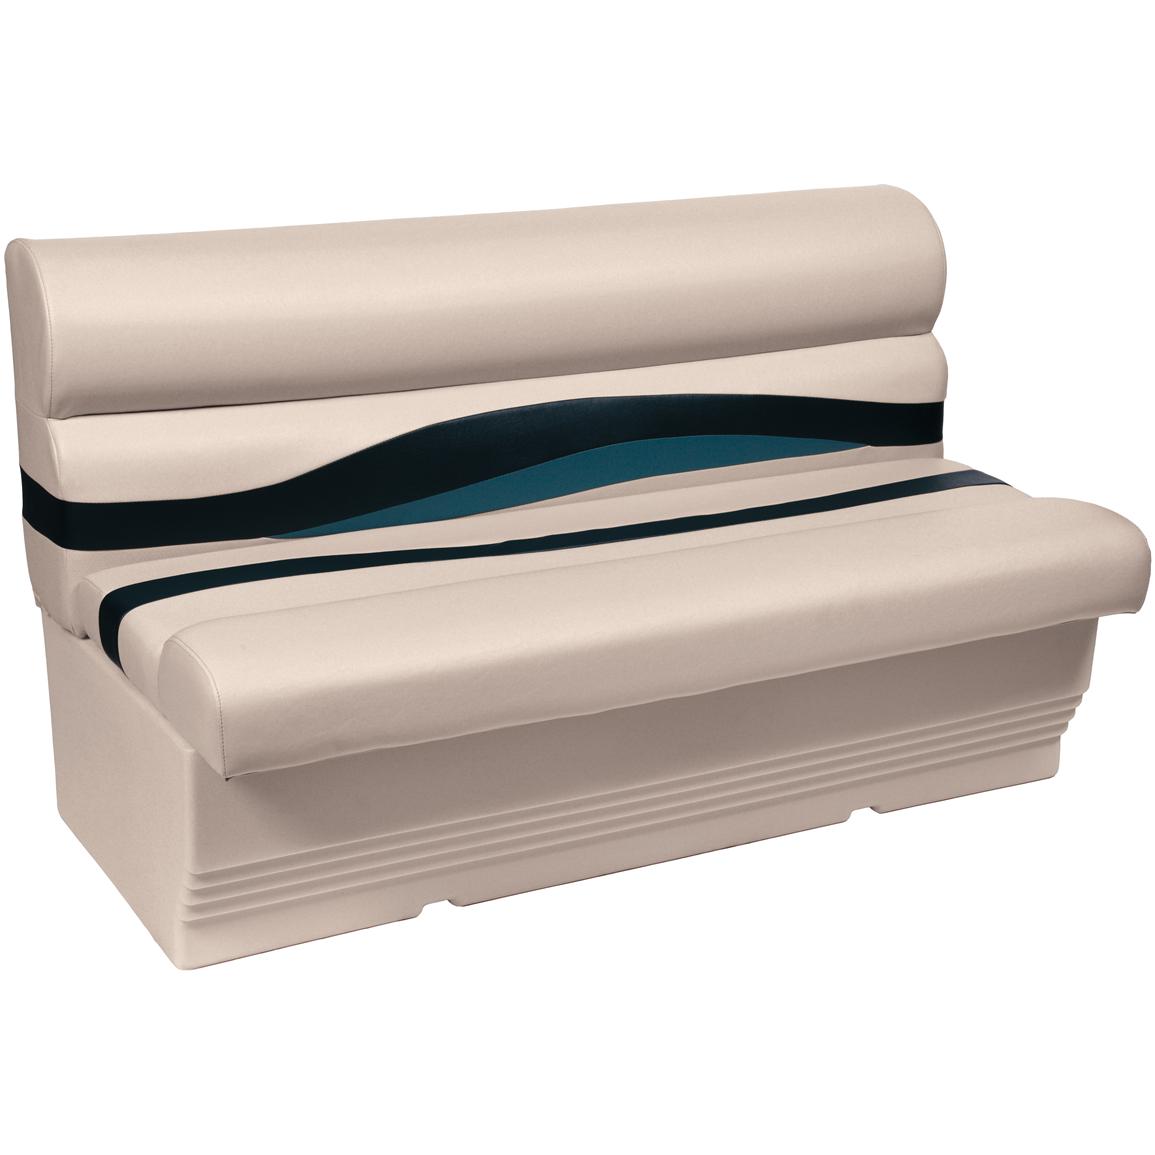 Wise® Premier 1100 Series 50 inch Pontoon Bench Seat, Color A